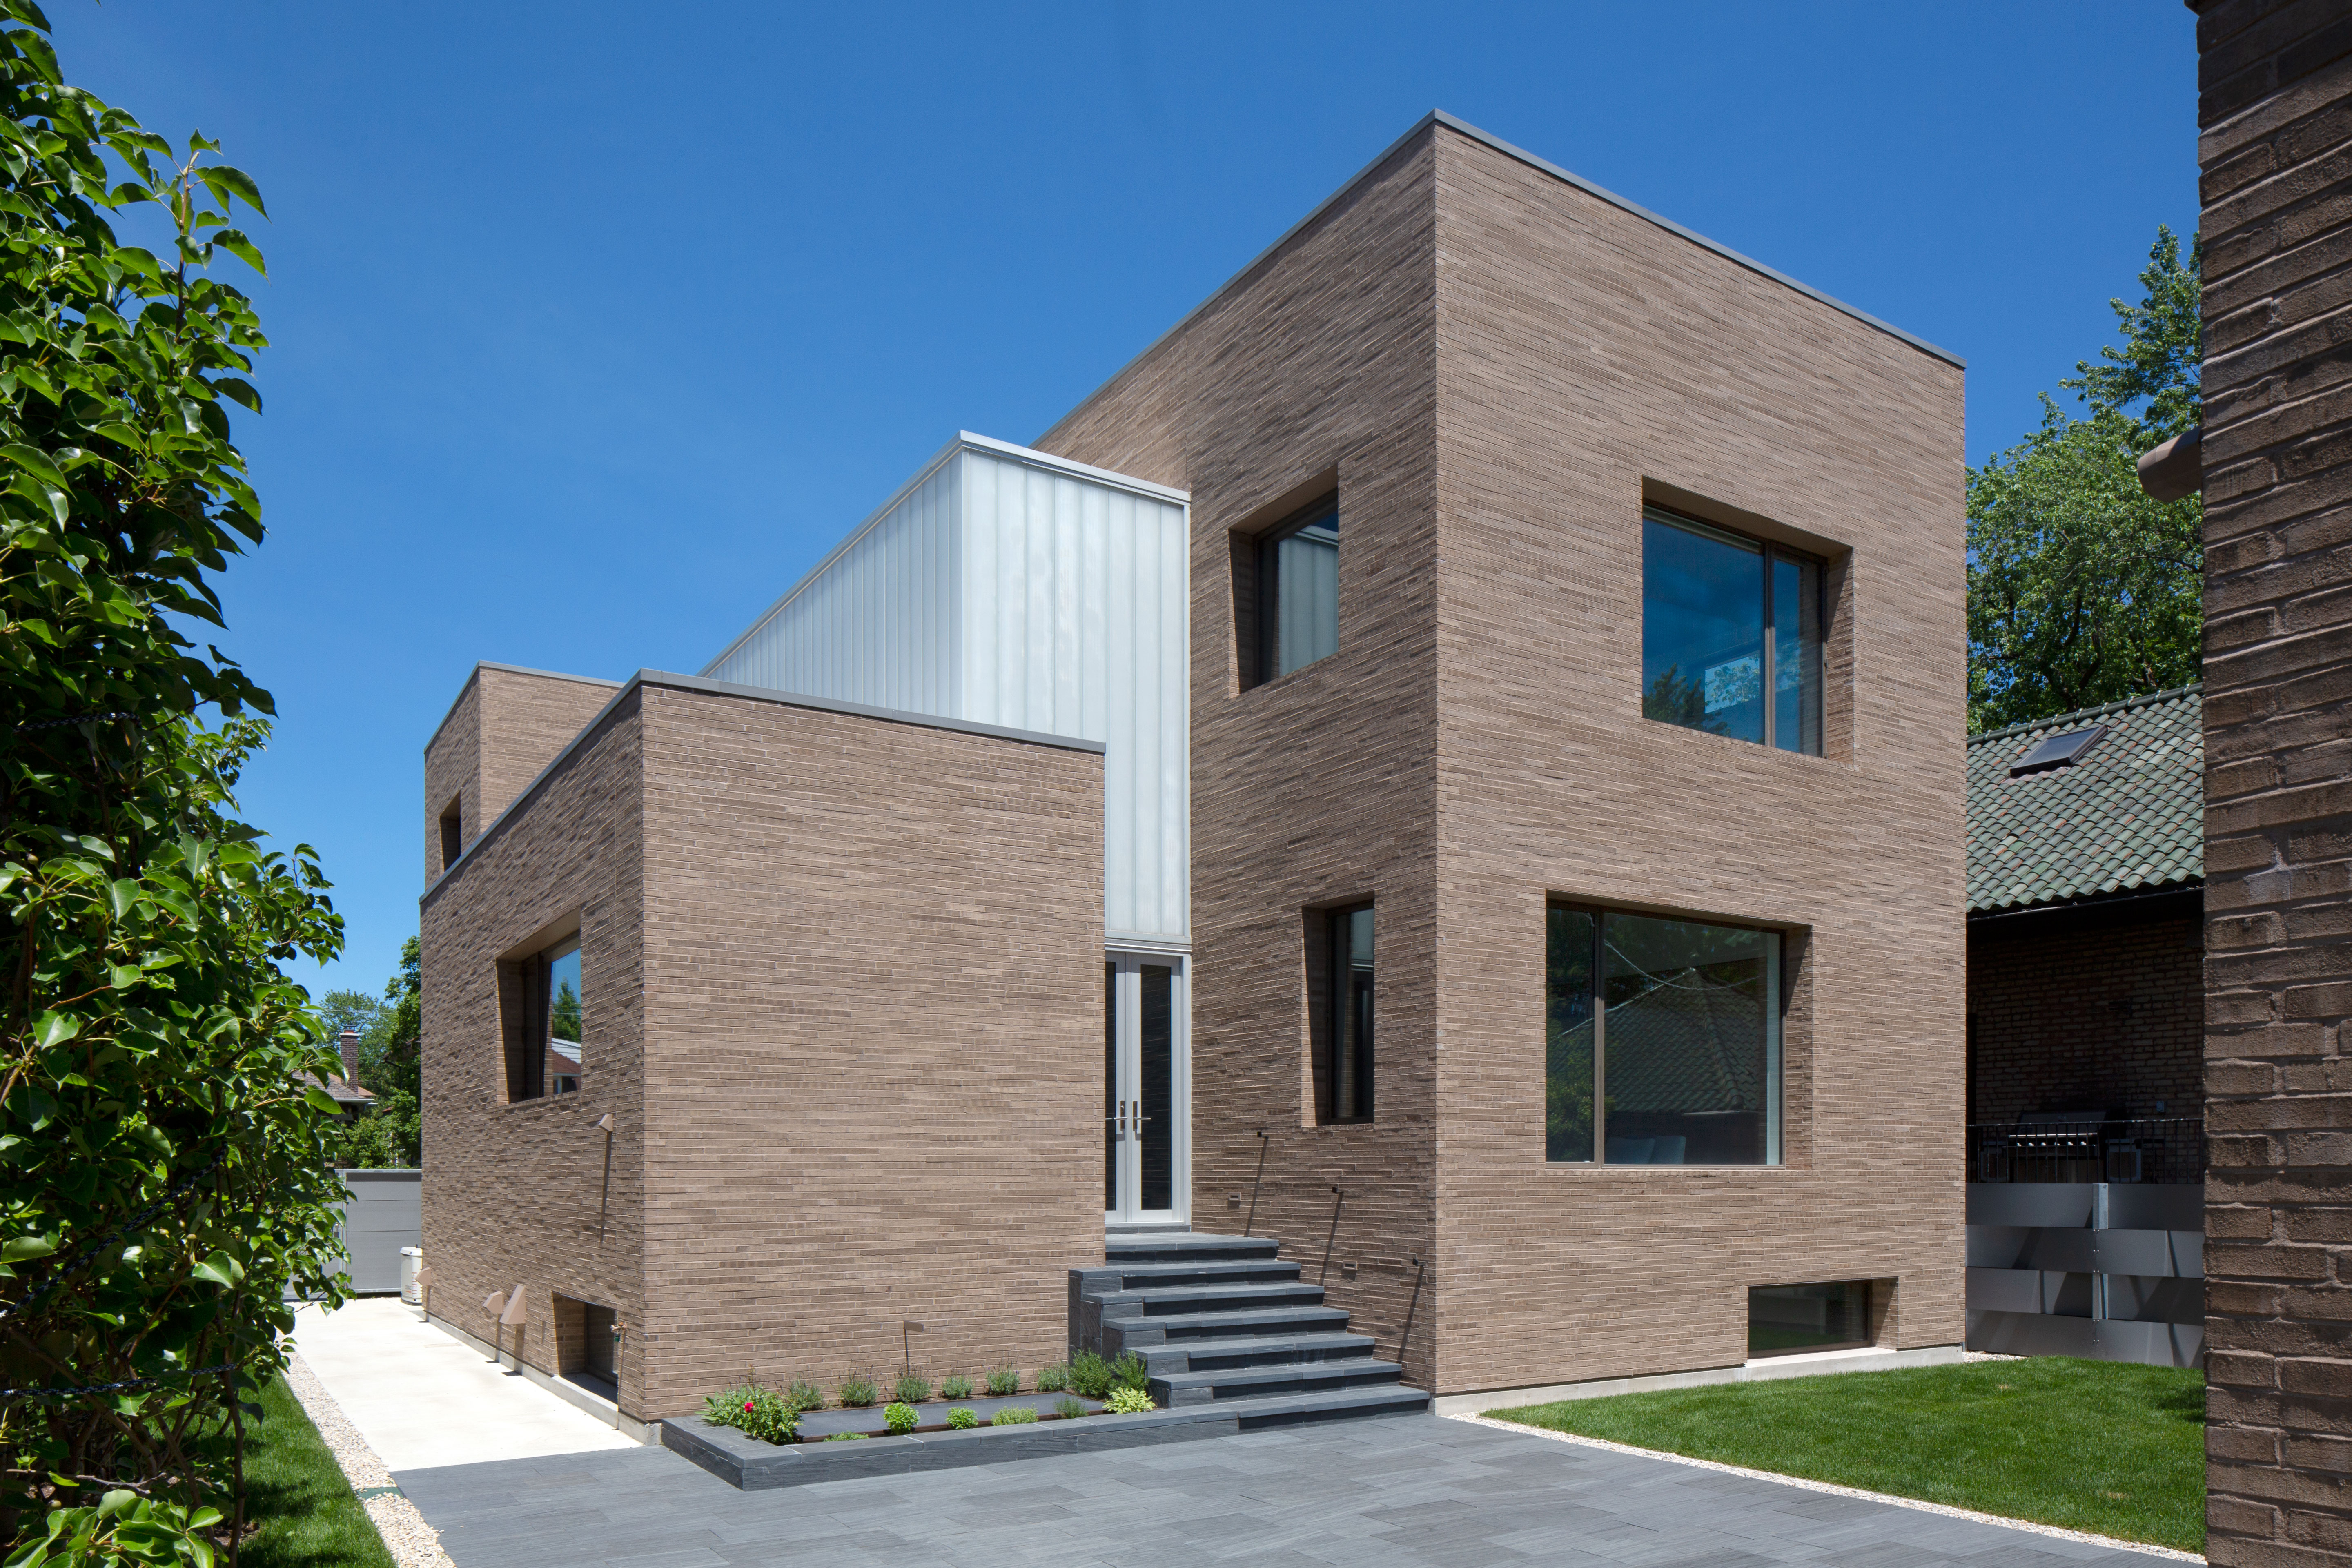 roman maximus gray brick featured in stunning residential architecture project spotlight